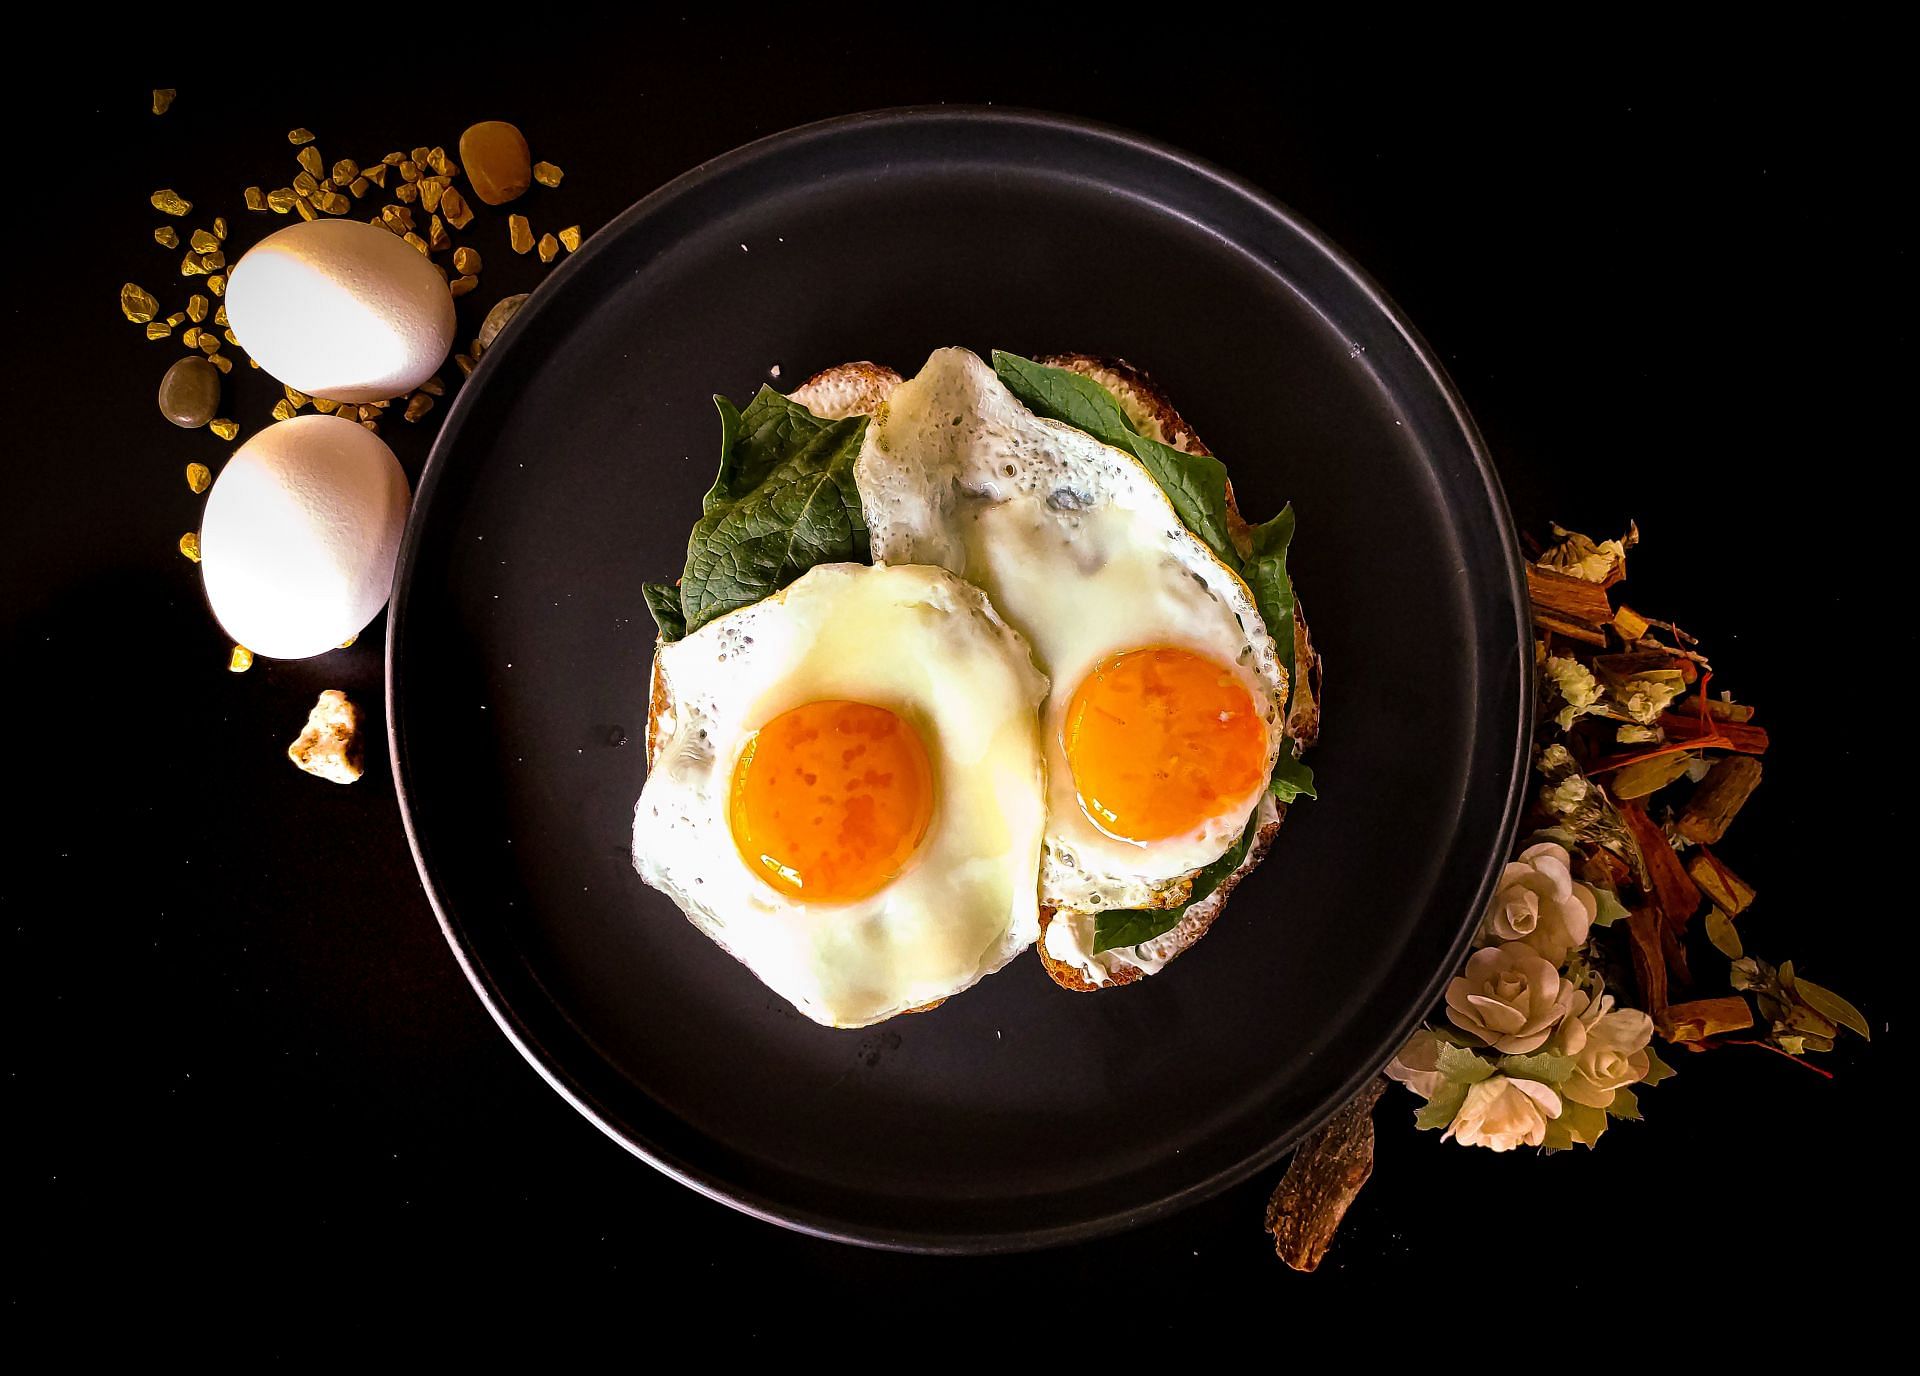 Eggs can be used to prepare amazing South Beach breakfasts.(Image via Unsplash/Coffeefy Workafe)